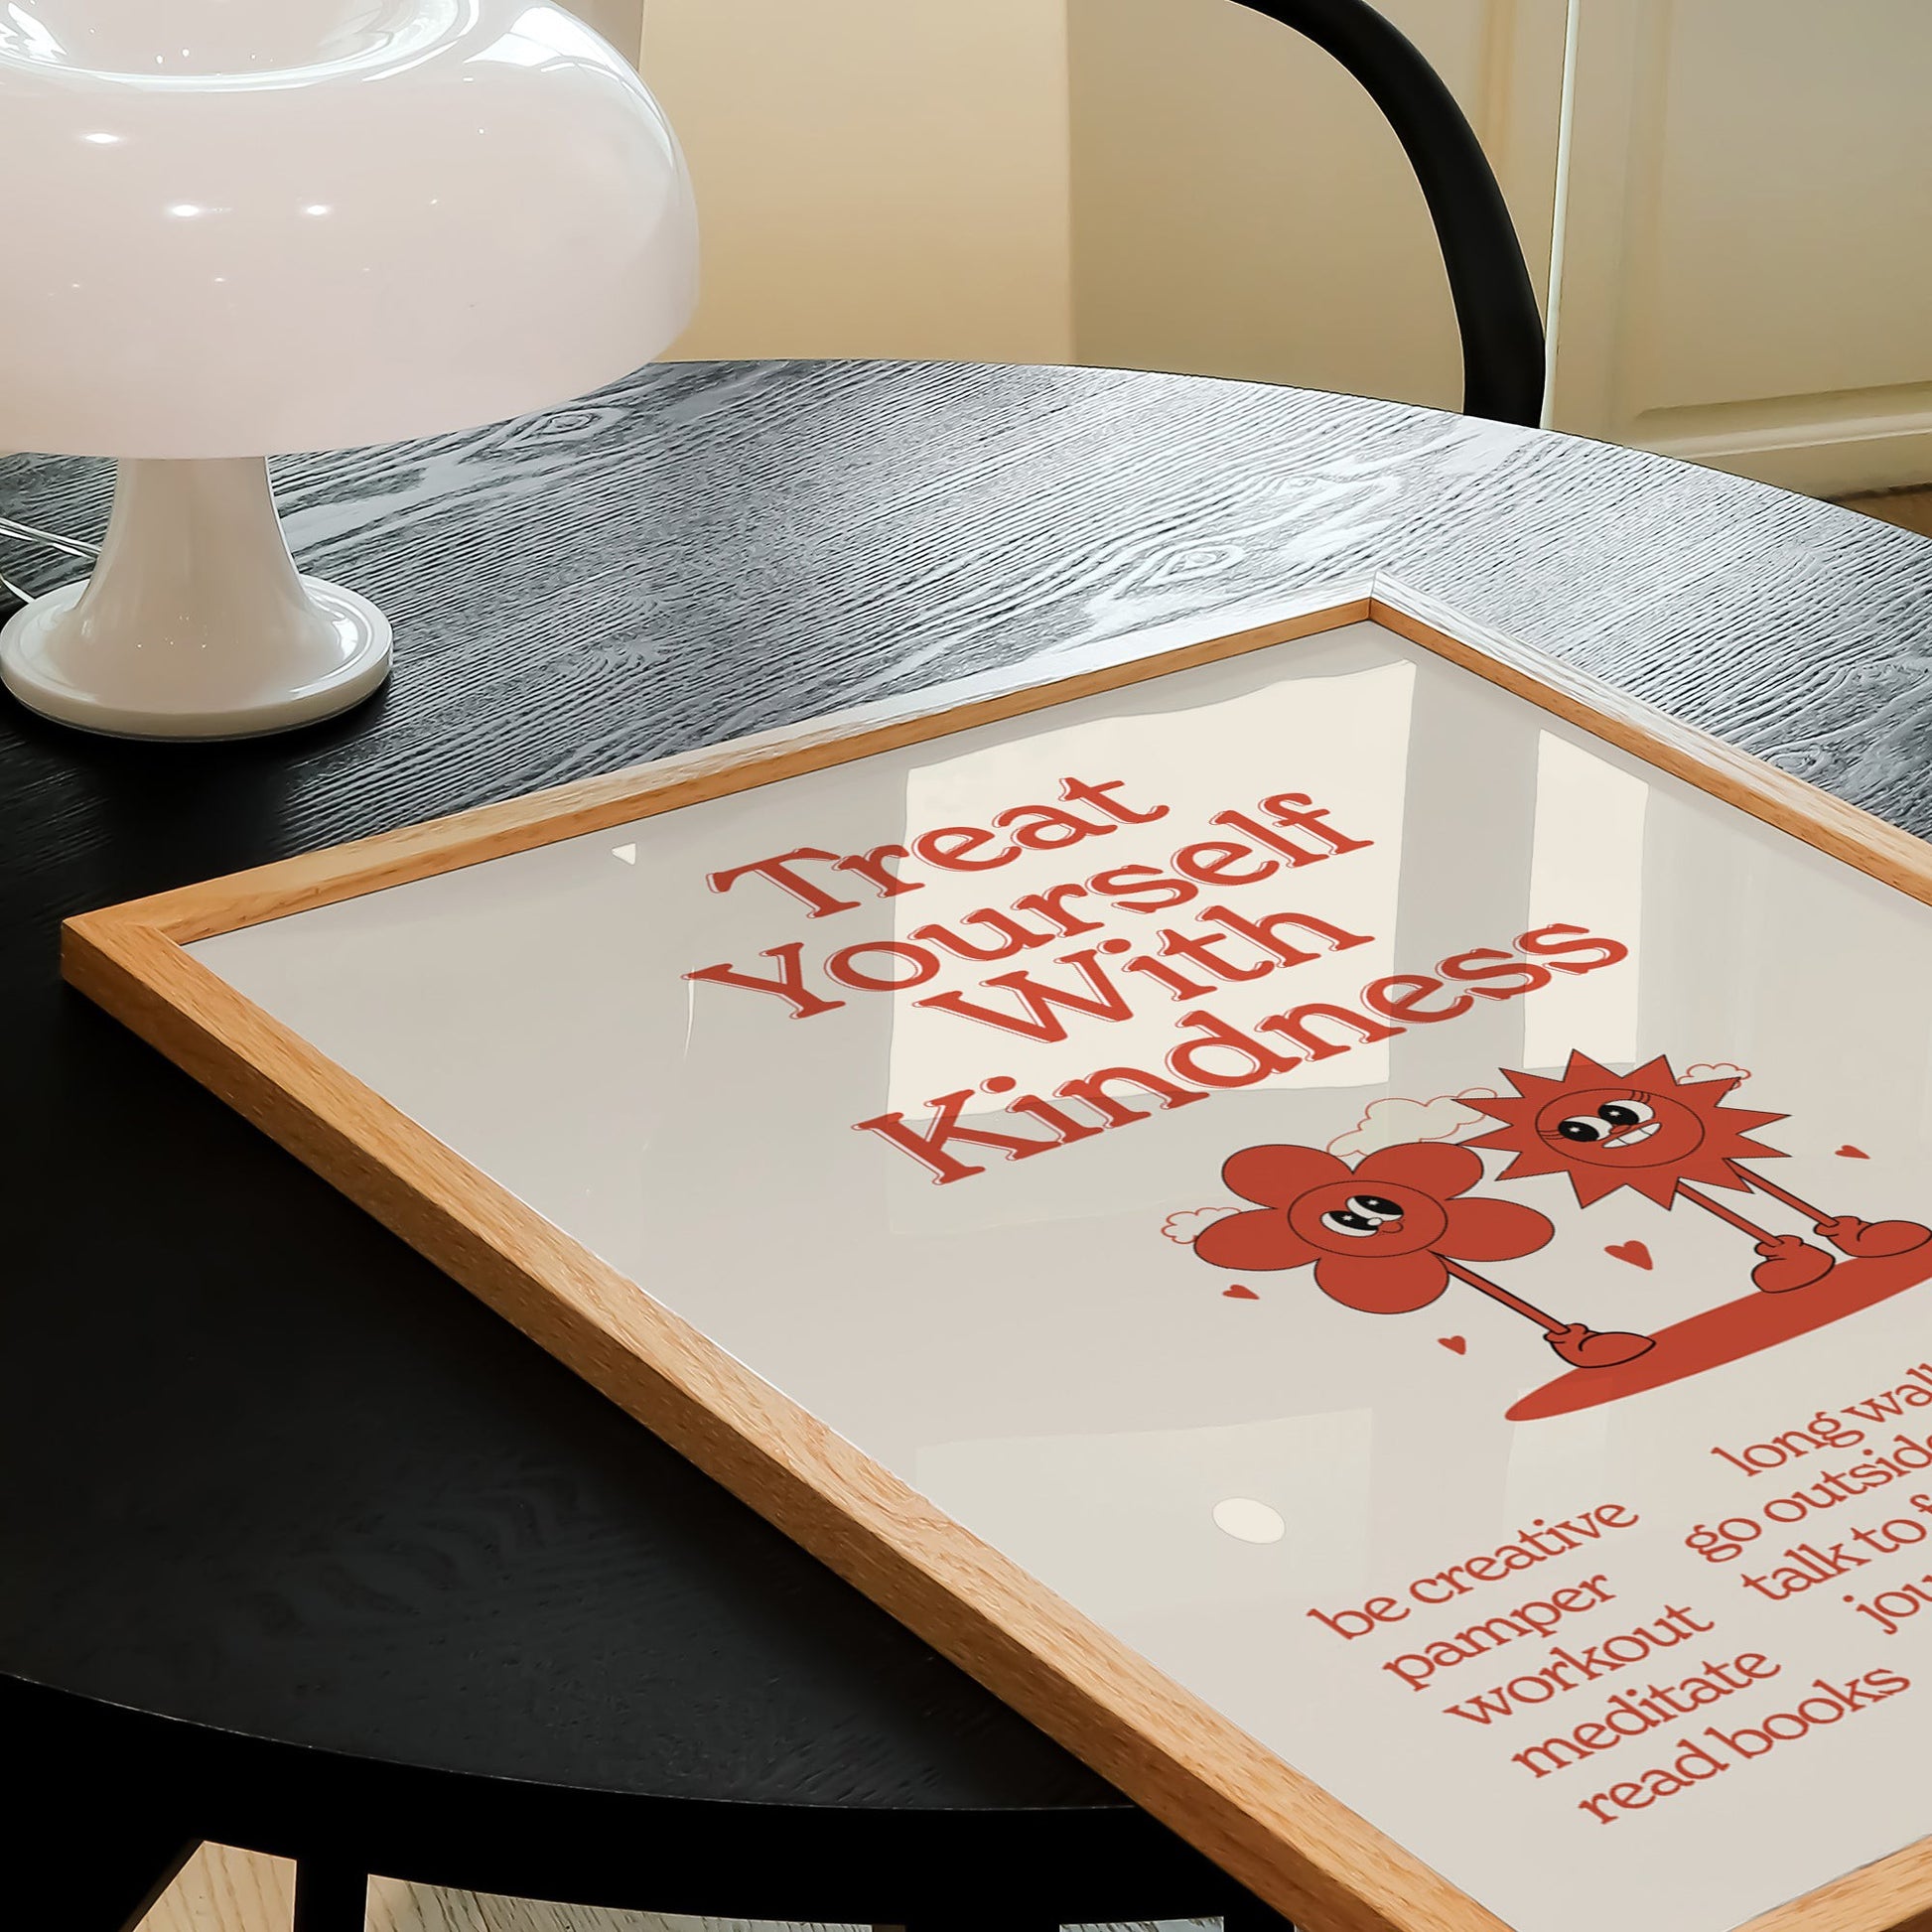 Lune Yourself Retro Treat Print – Kindness Club With